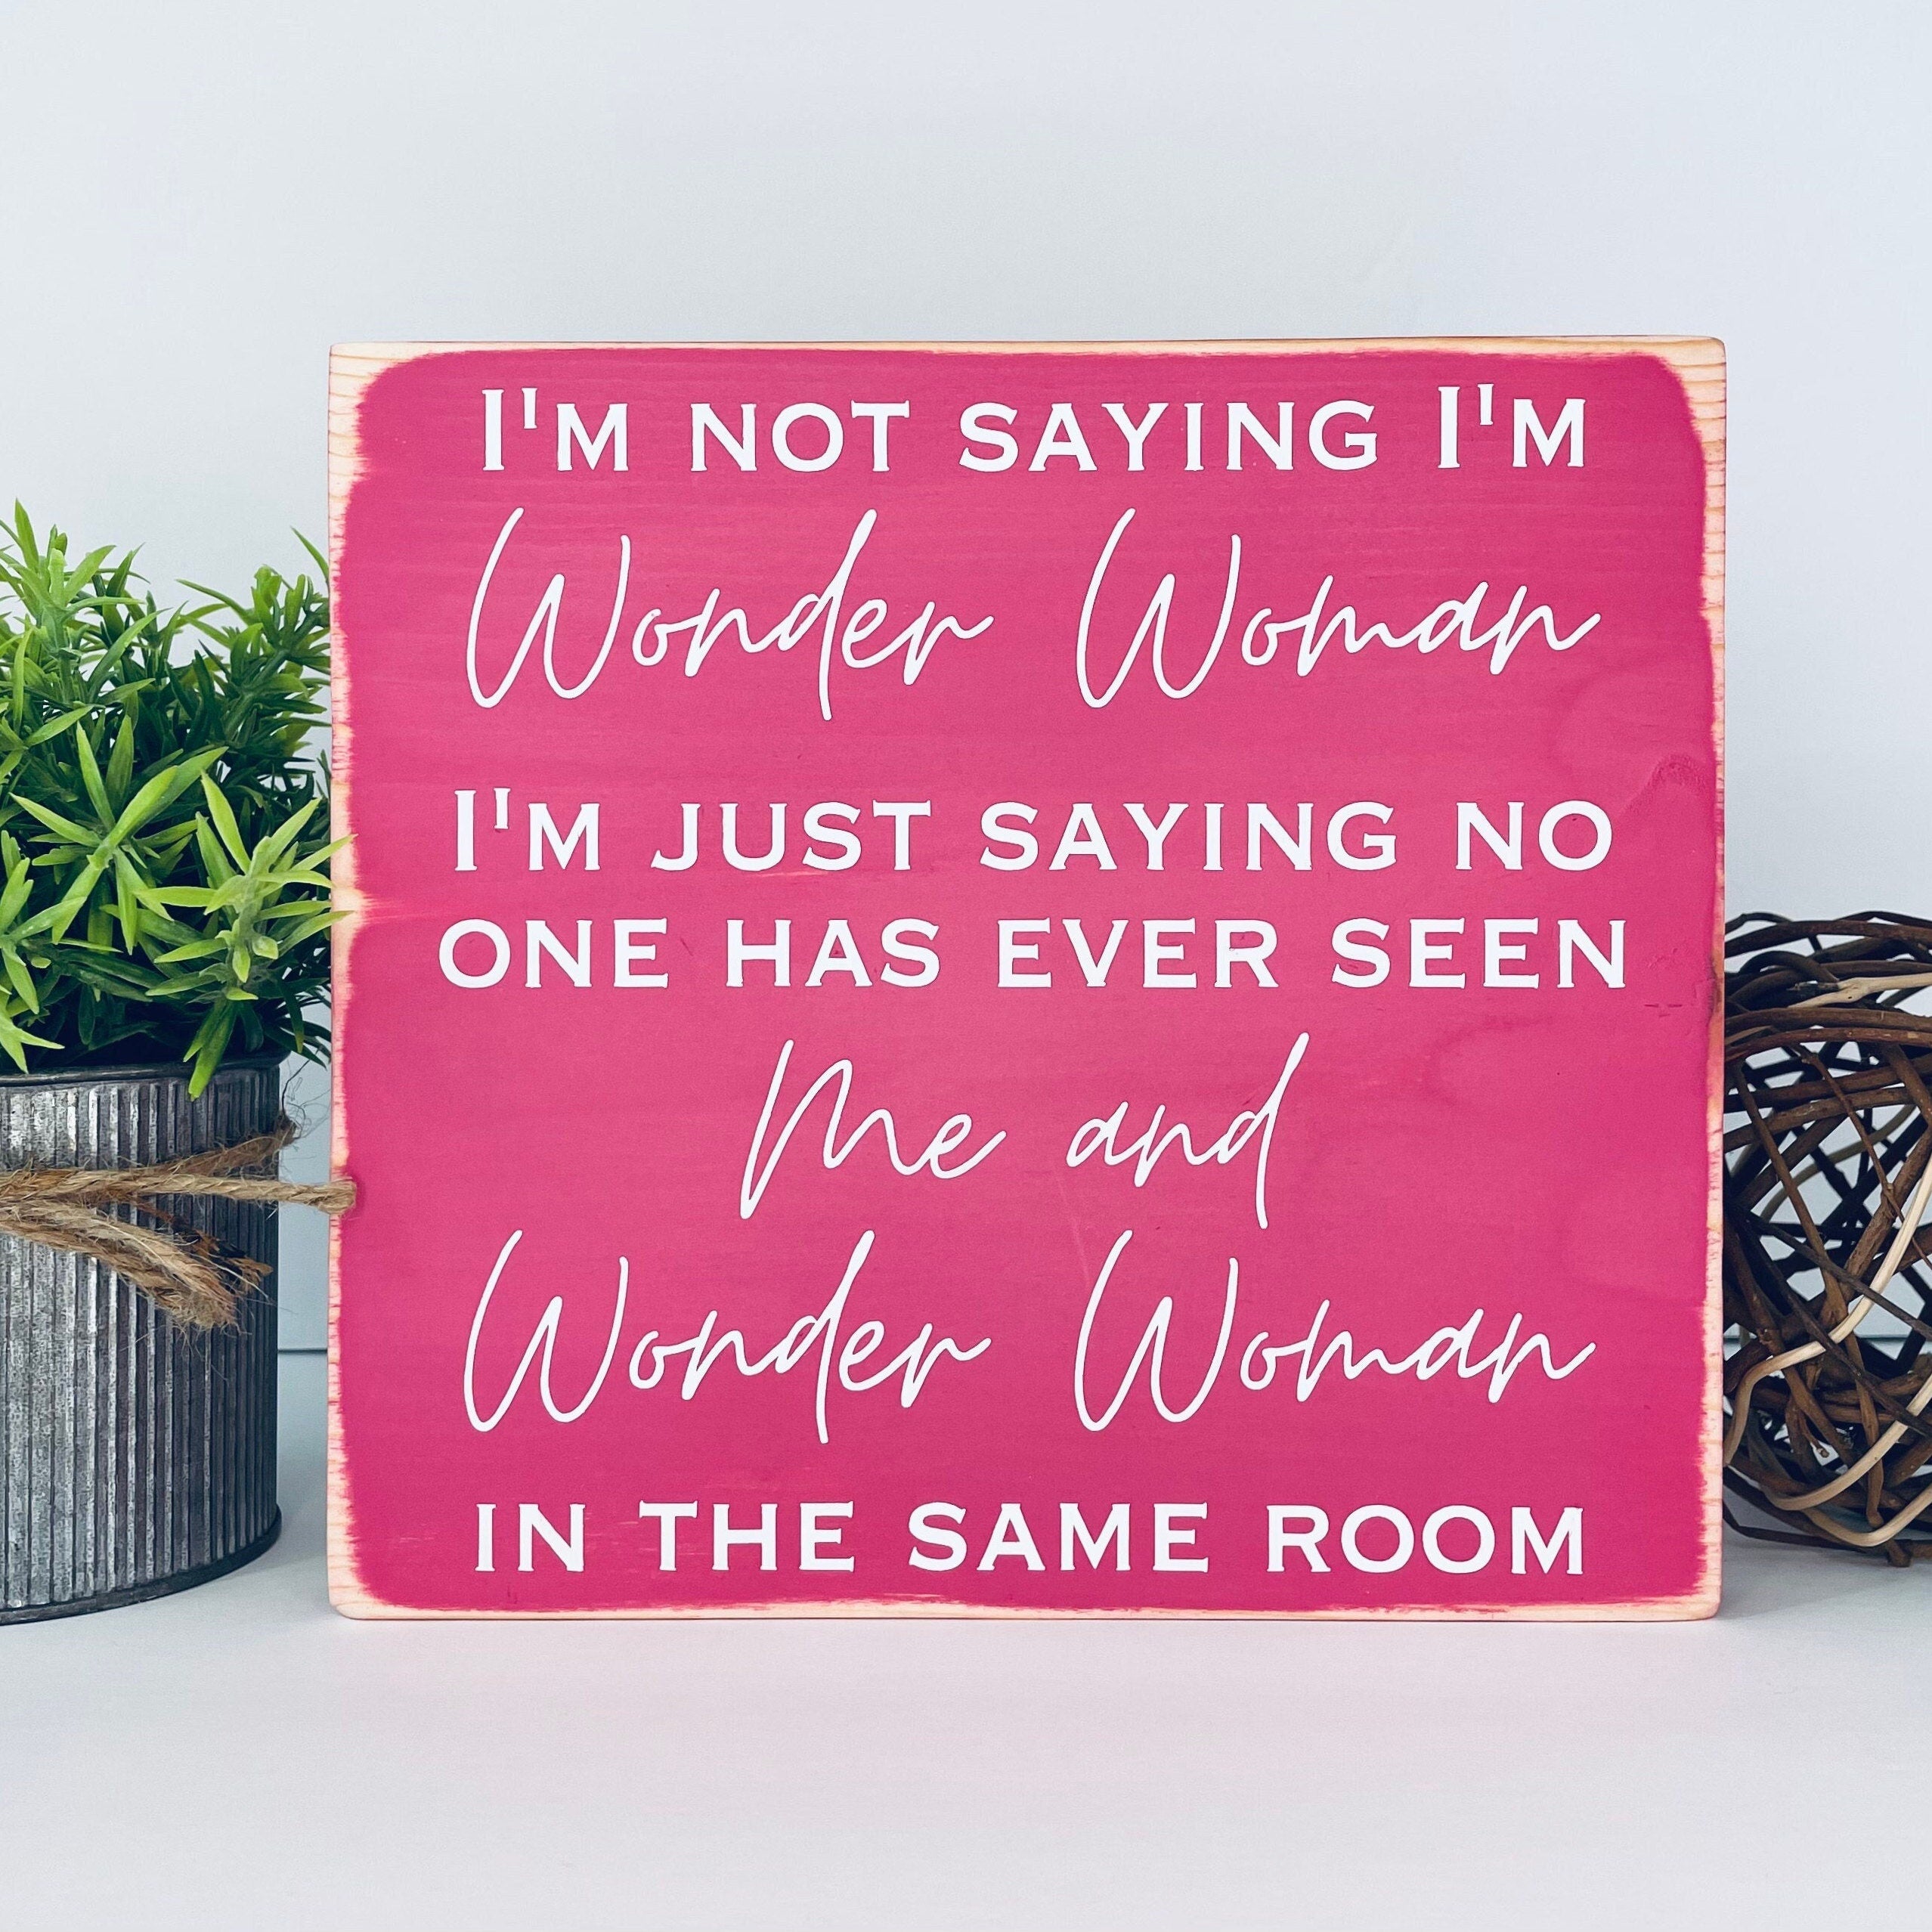 medium sized square wood sign painted pink with white lettering that reads, " I'm not saying I'm Wonder Woman, I'm just saying no one has ever seen me and Wonder Woman in the same room". All text is in all caps except for "Wonder Woman" and "Me and Wonder Woman". Text is centered, takes up the entire area and is on 7 lines. Matte finish.